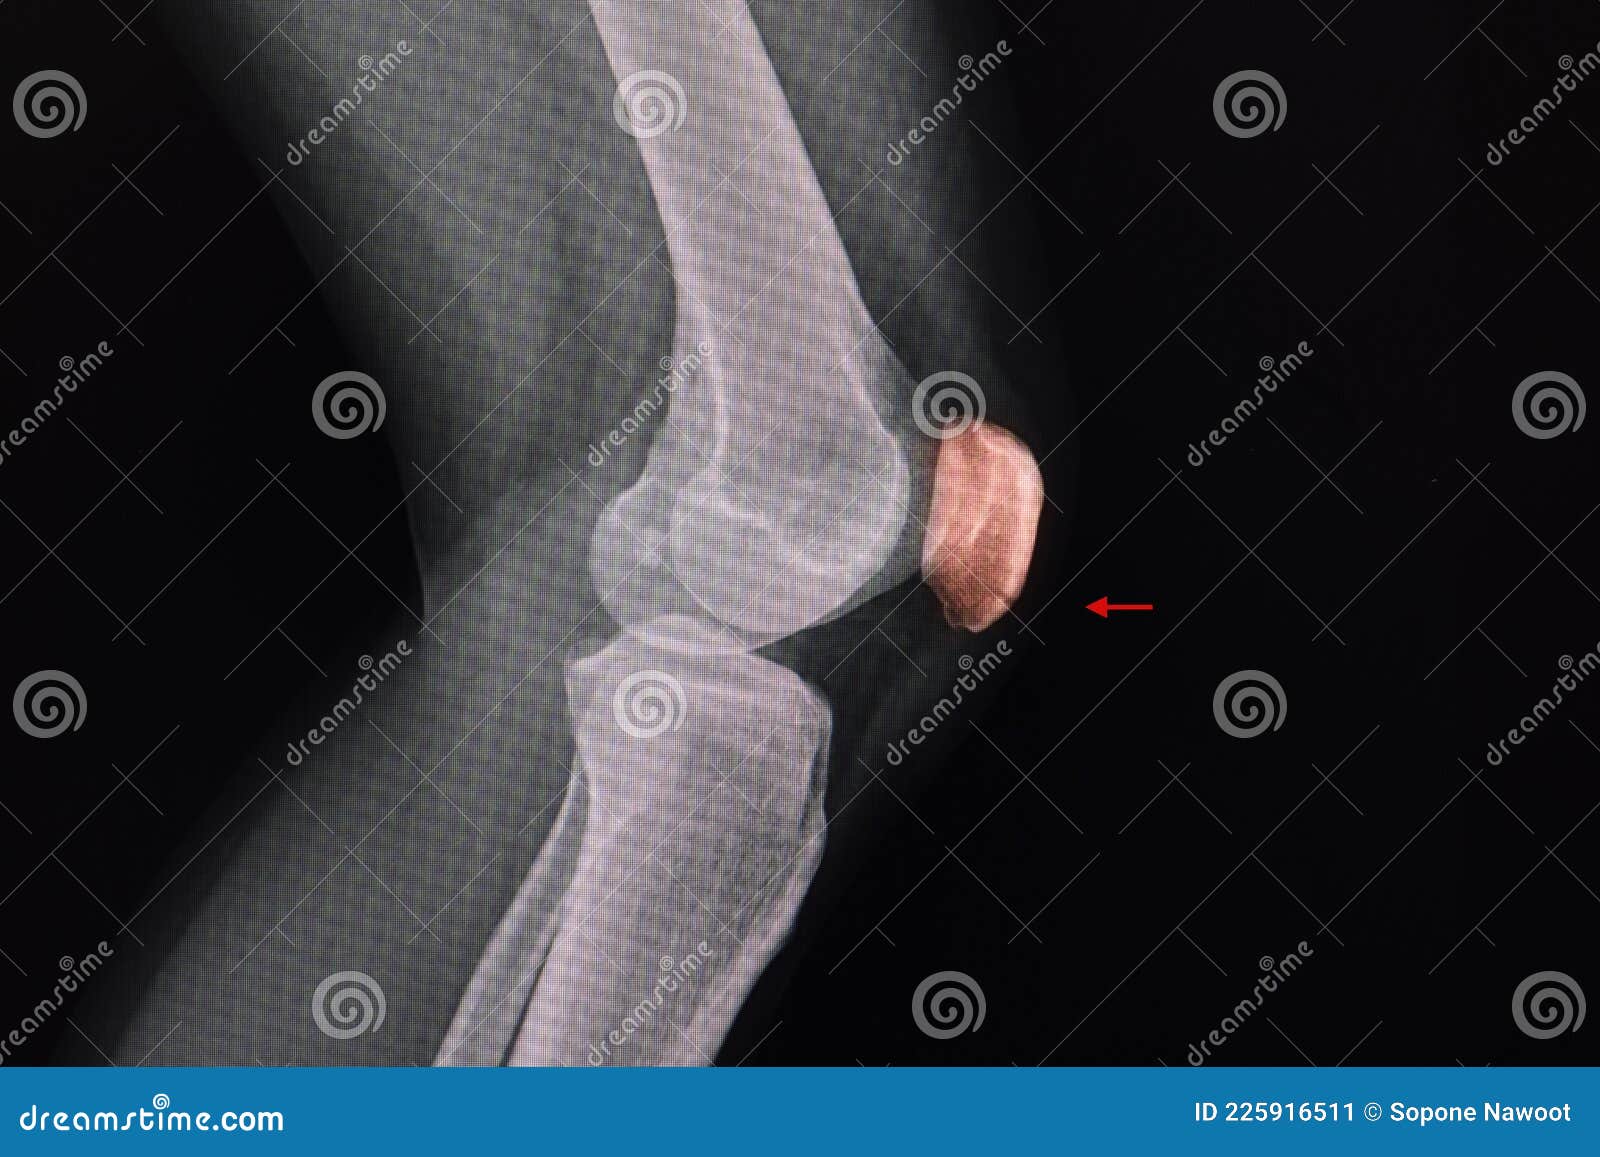 knee xray of a patient showing a lucent line at lower part of patella